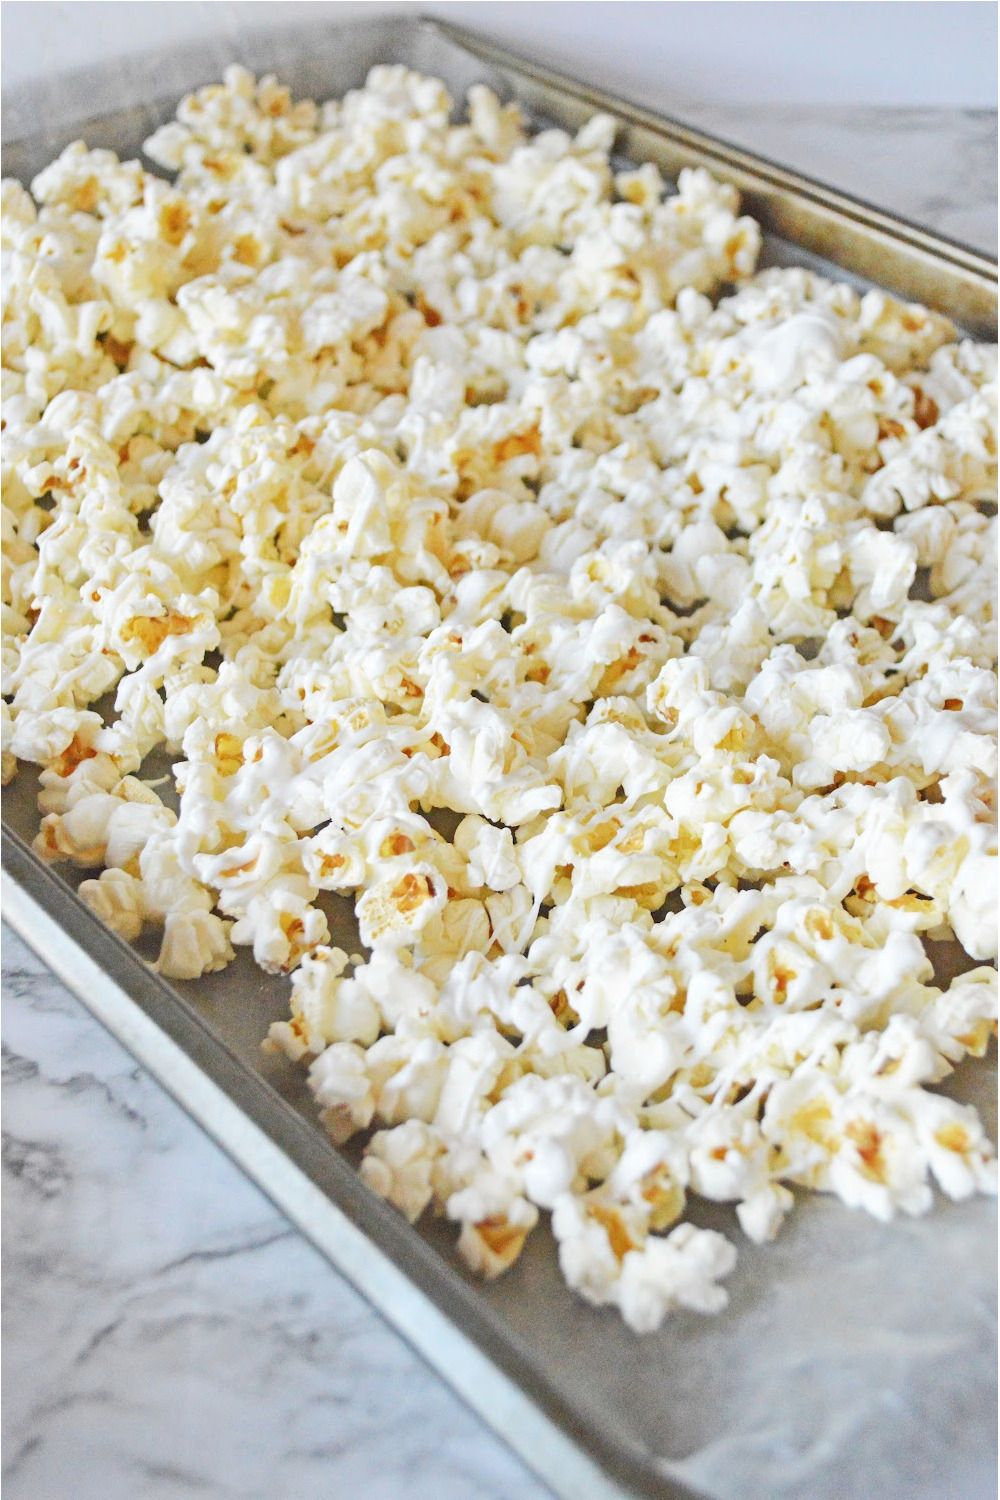 popcorn spread on a baking sheet with white candy melts drizzled on top.